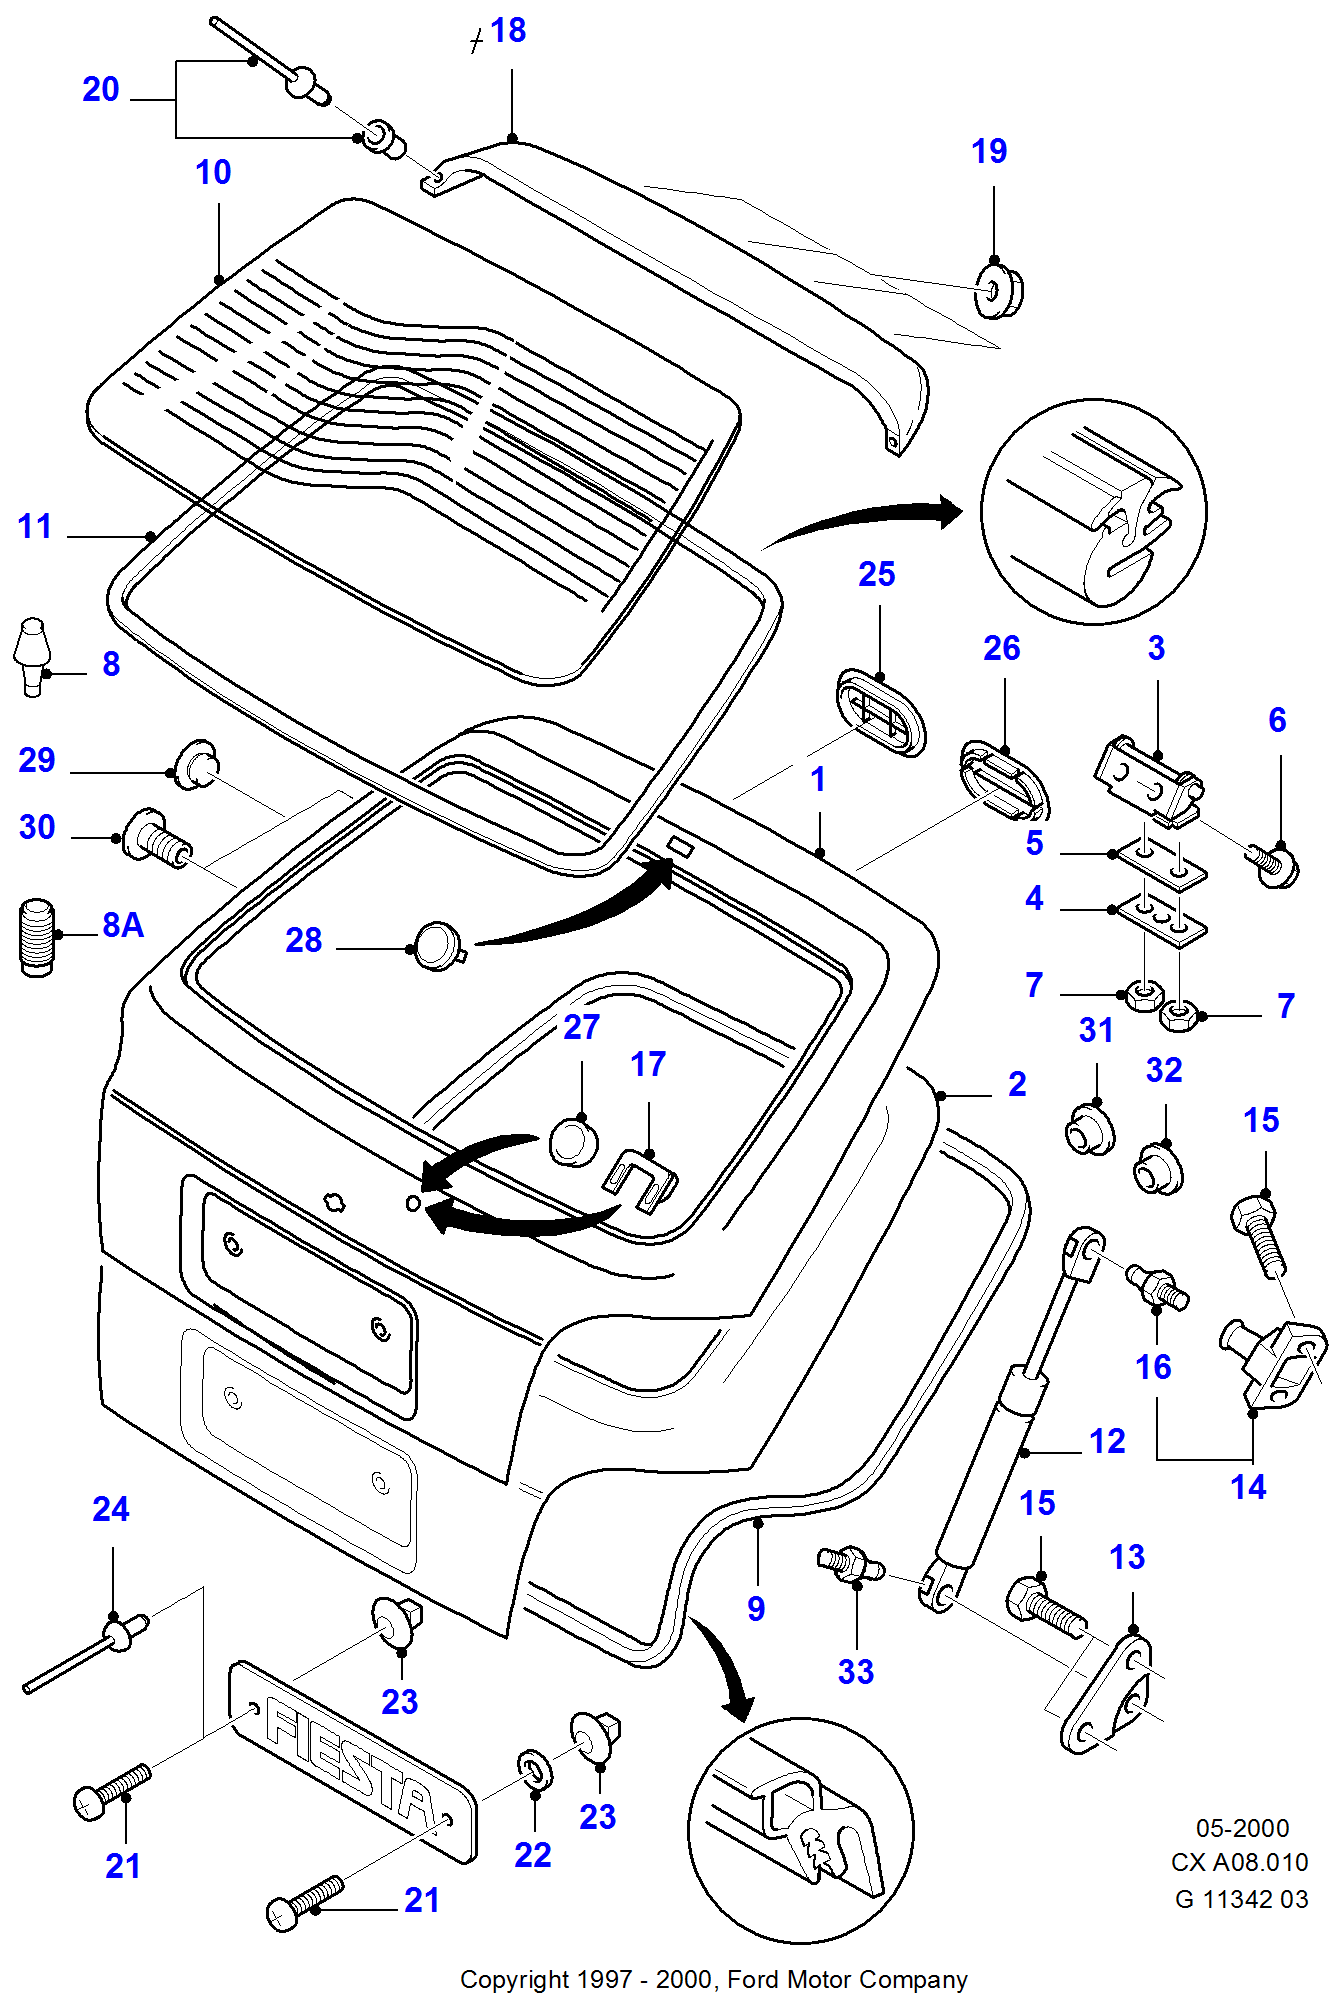 Tailgate And Related Parts for Ford Fiesta Fiesta 1989-1996               (CX)